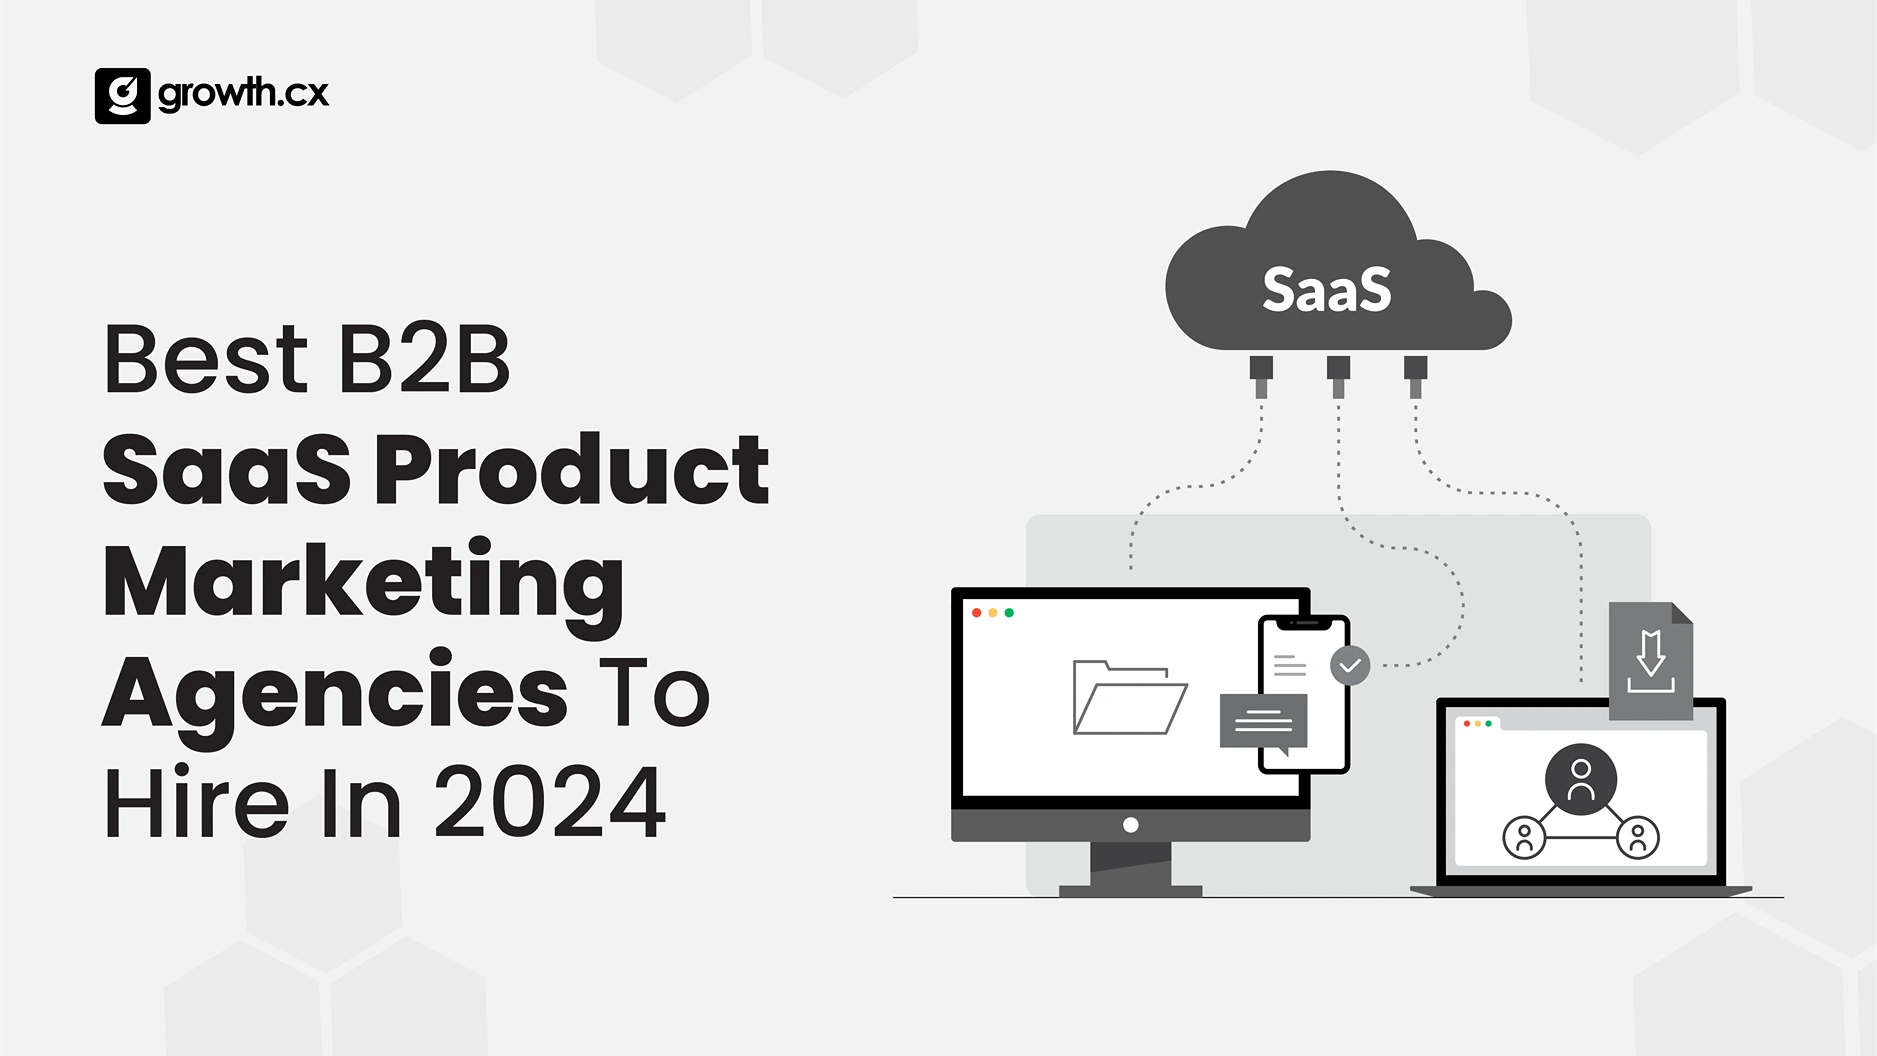 Best B2B SaaS Product Marketing Agencies To Hire In 2024